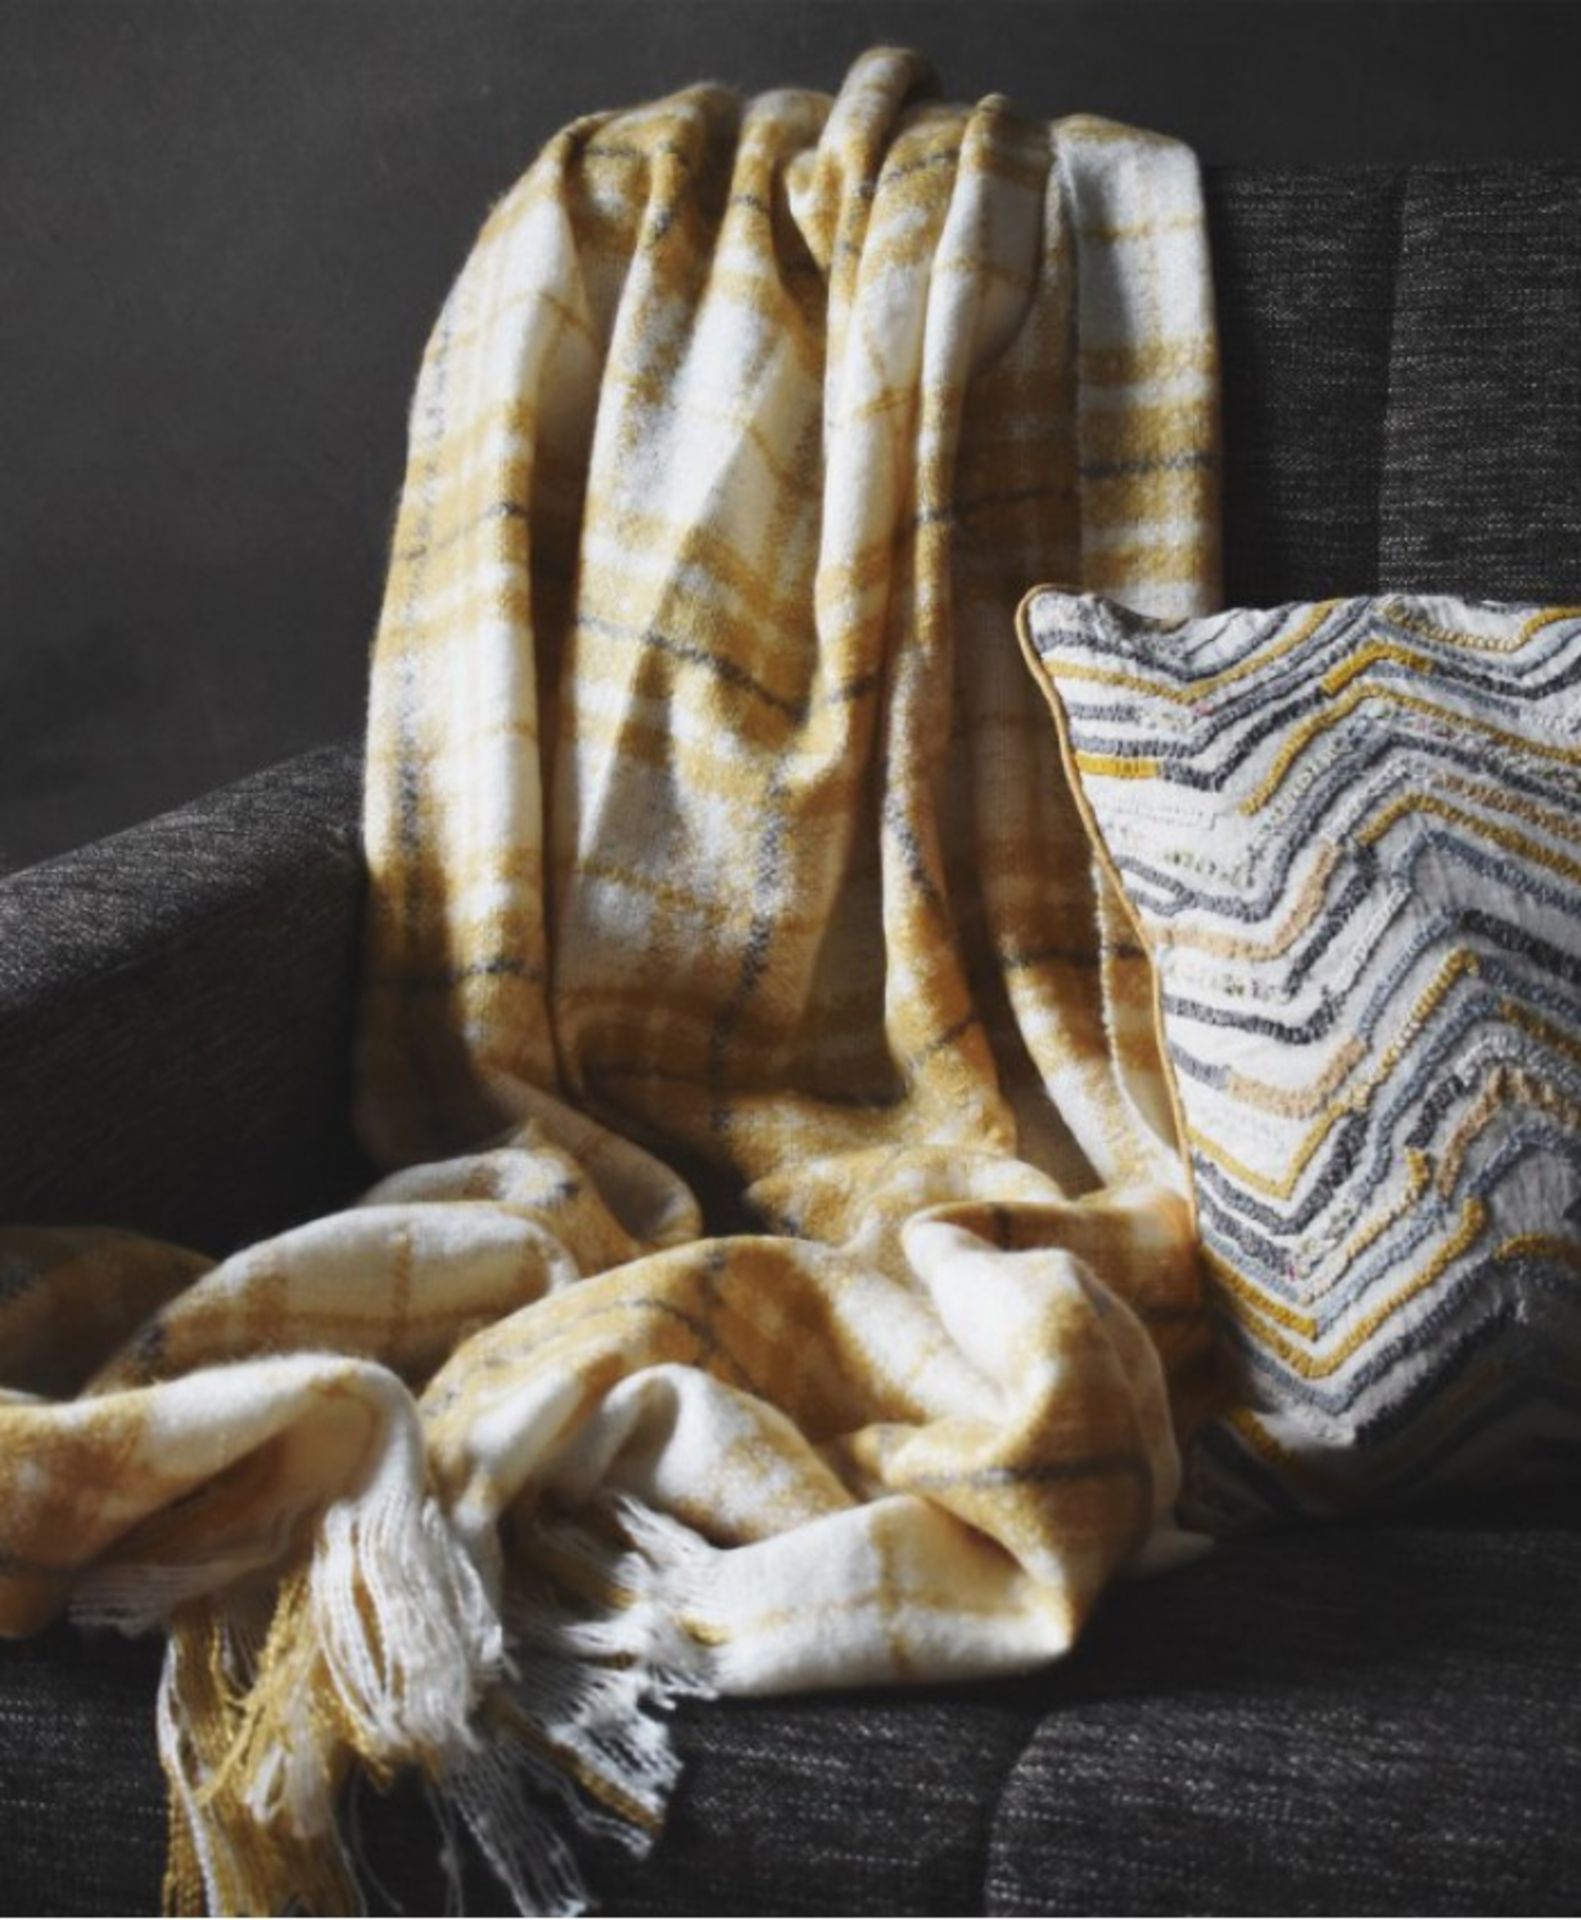 Kasbah Textured Throw Perfect For Covering Chairs Or For Keeping Warm 1700 X 1300mm (5055999239288)